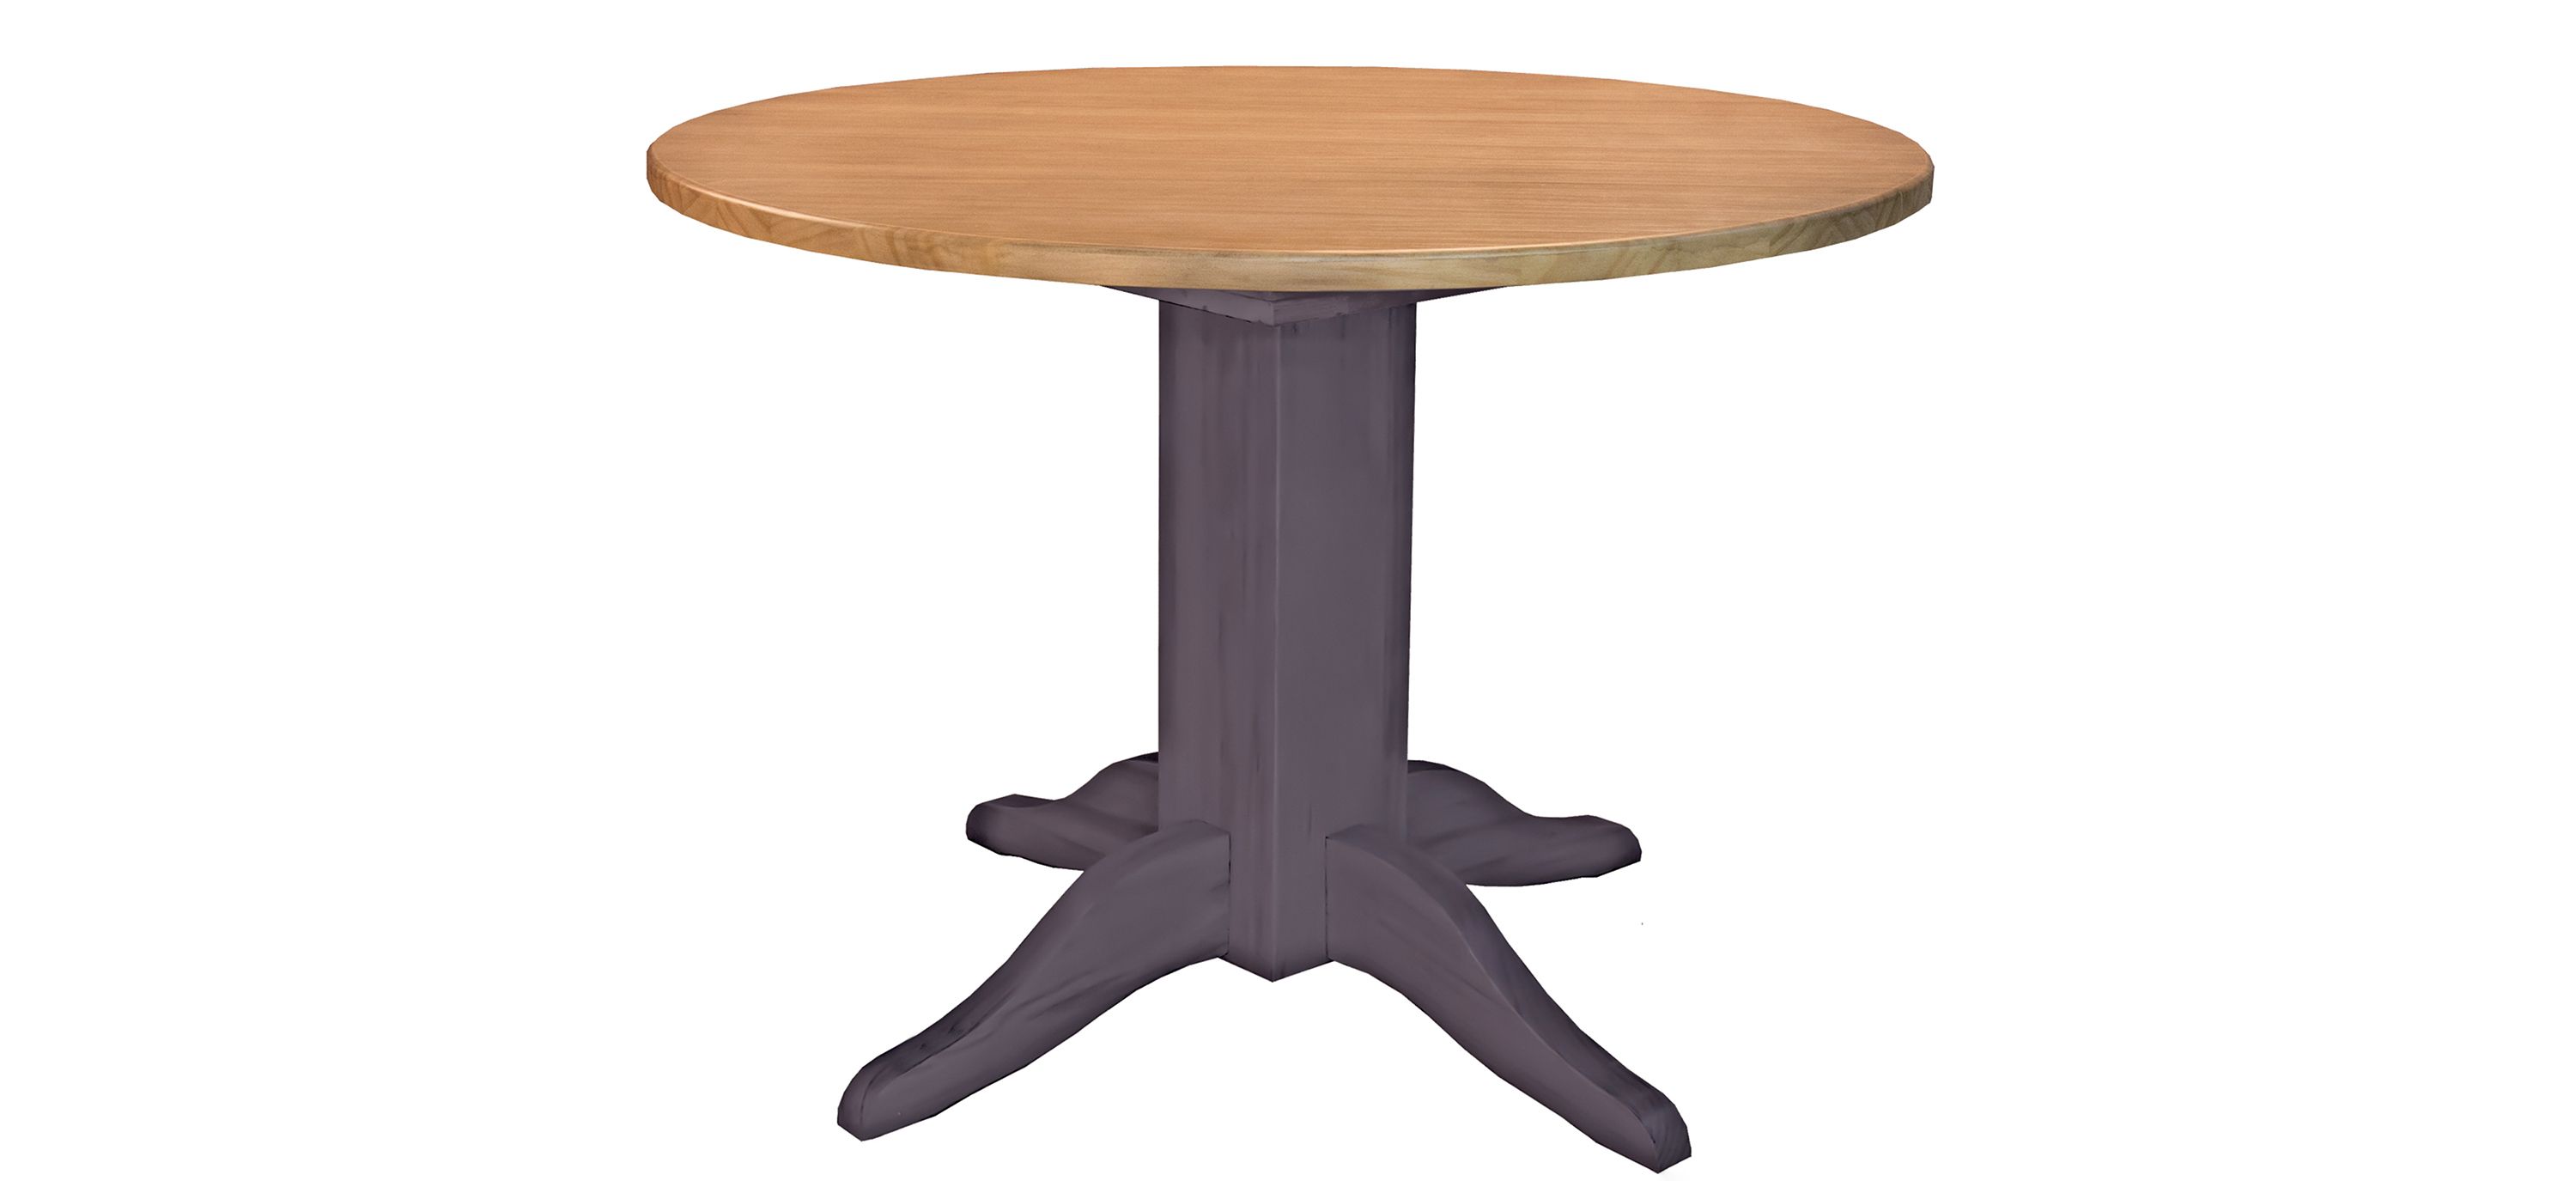 Port Townsend Round Double Drop Leaf Dining Table